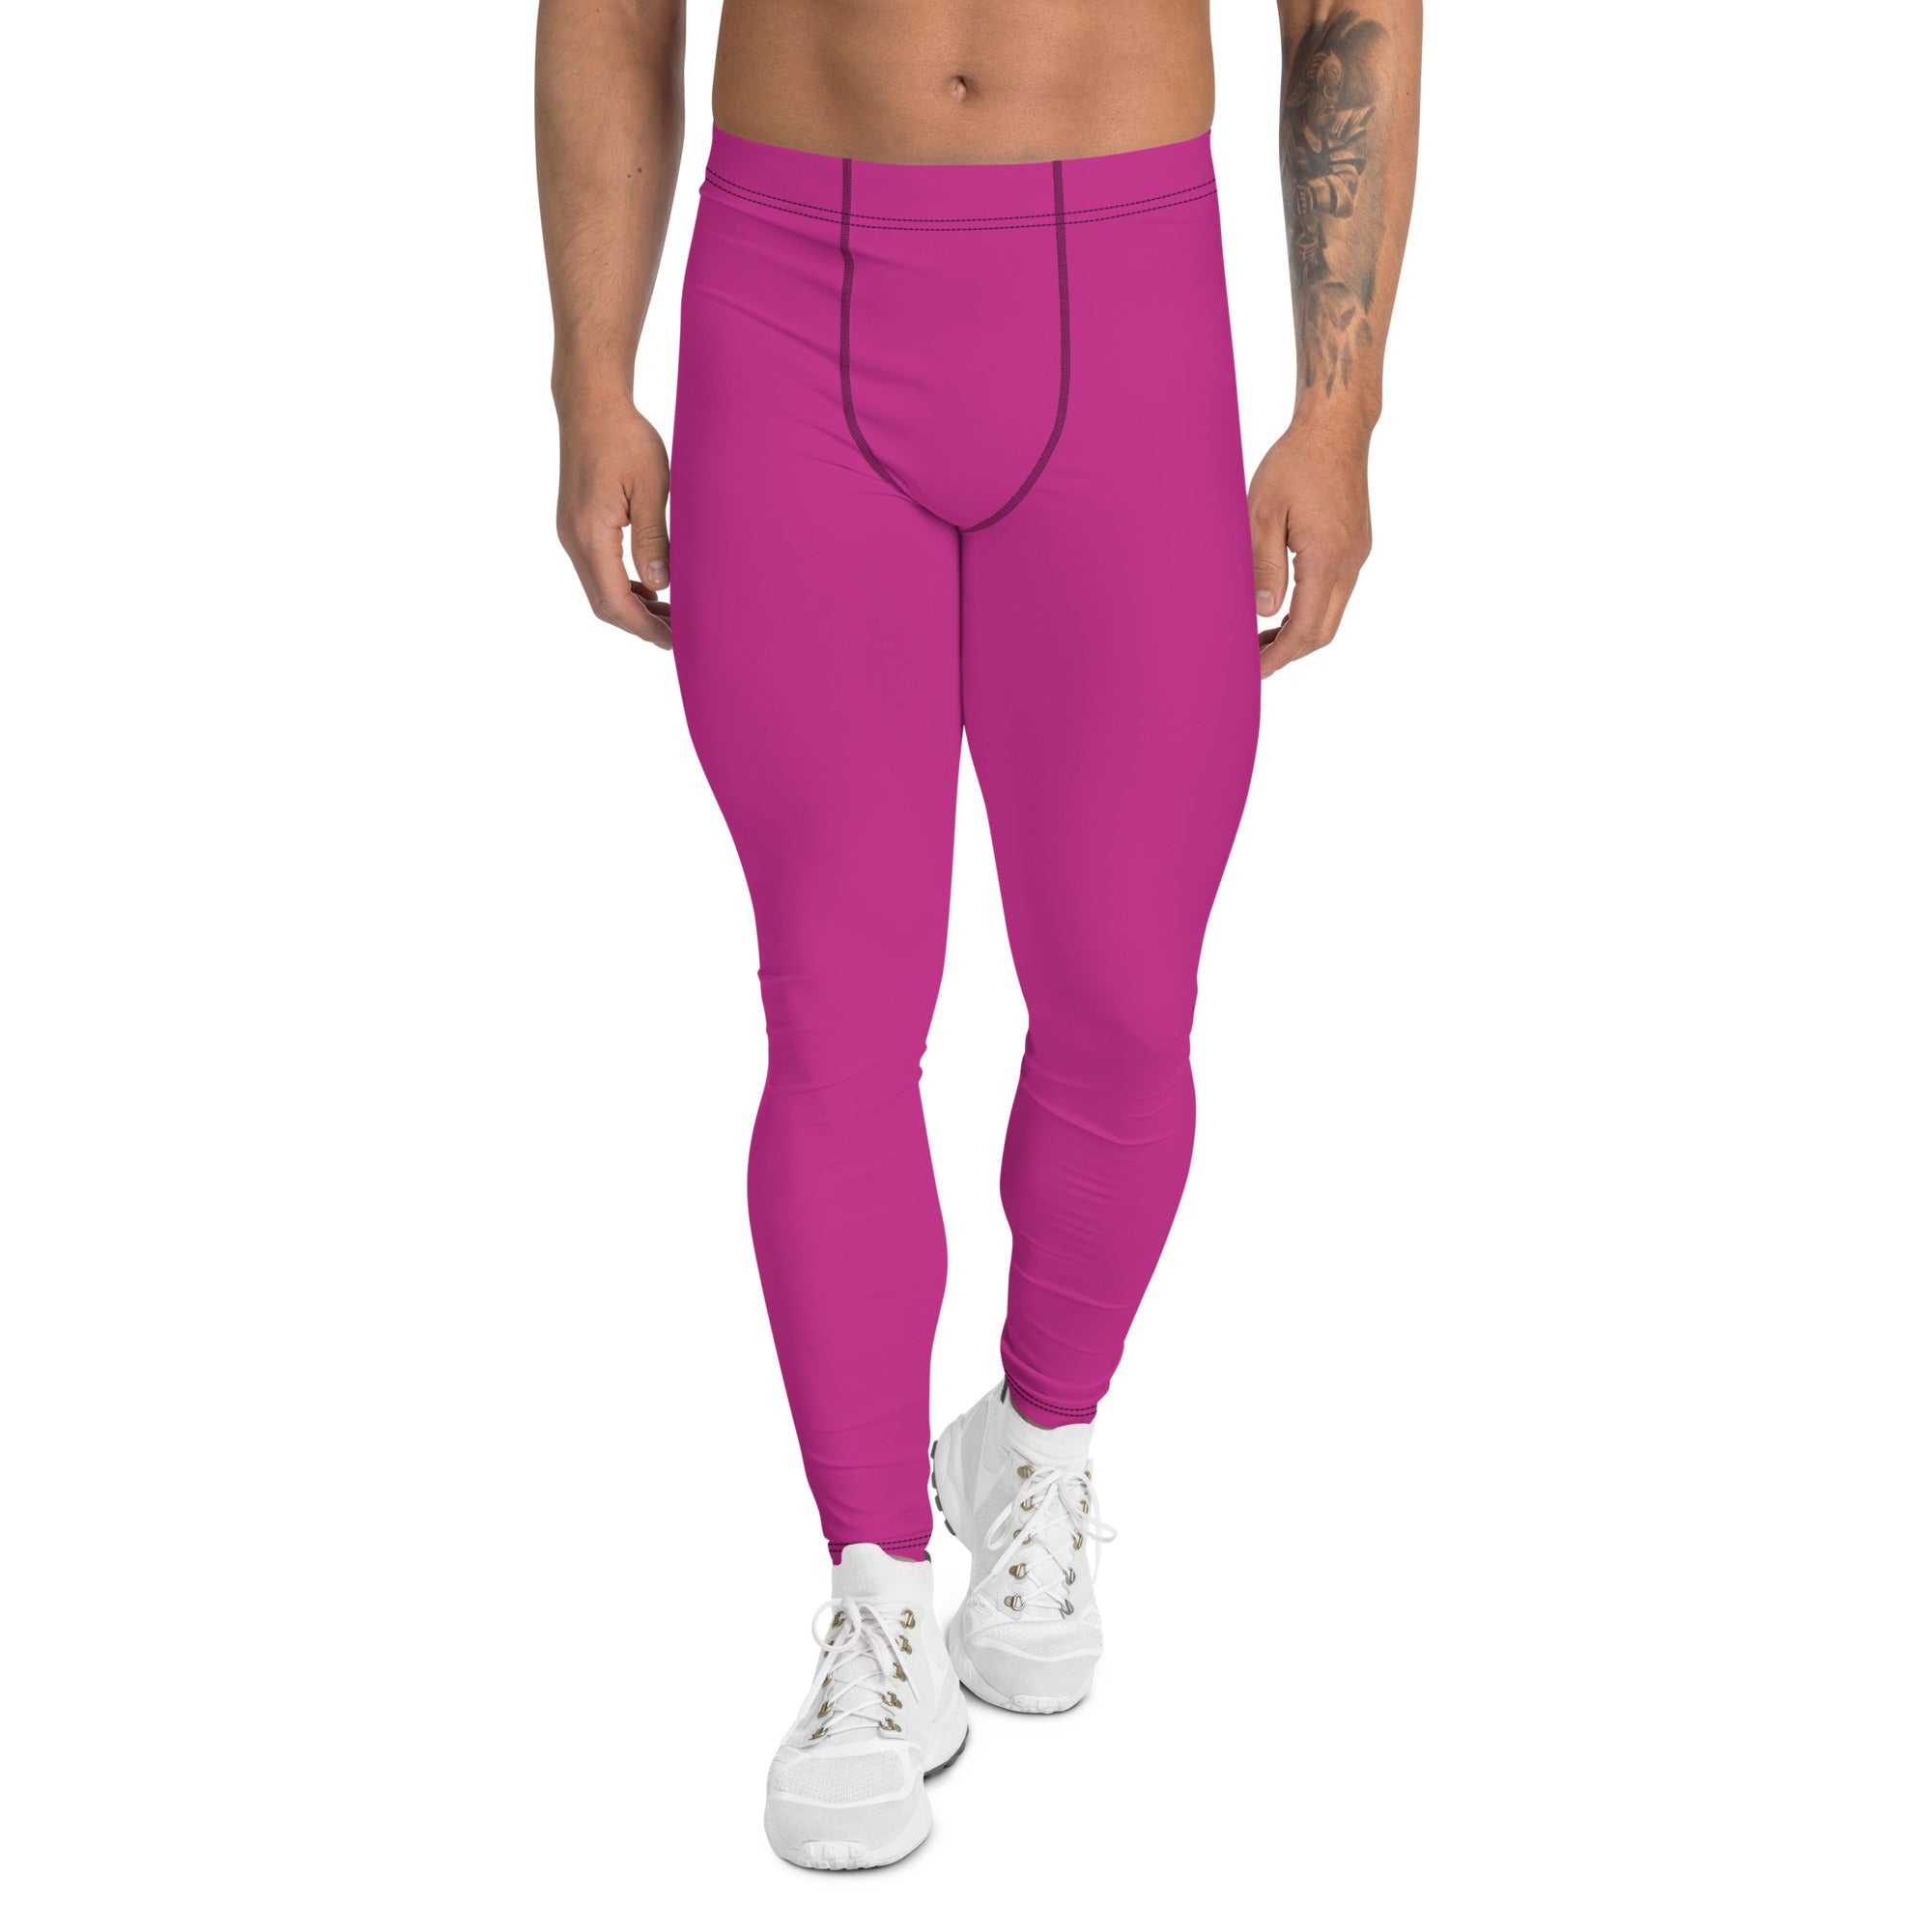 Hot Pink Solid Men's Leggings, Solid Pink Color Designer Print Sexy Meggings Men's Workout Gym Tights Leggings, Men's Compression Tights Pants - Made in USA/ EU/ MX (US Size: XS-3XL) 